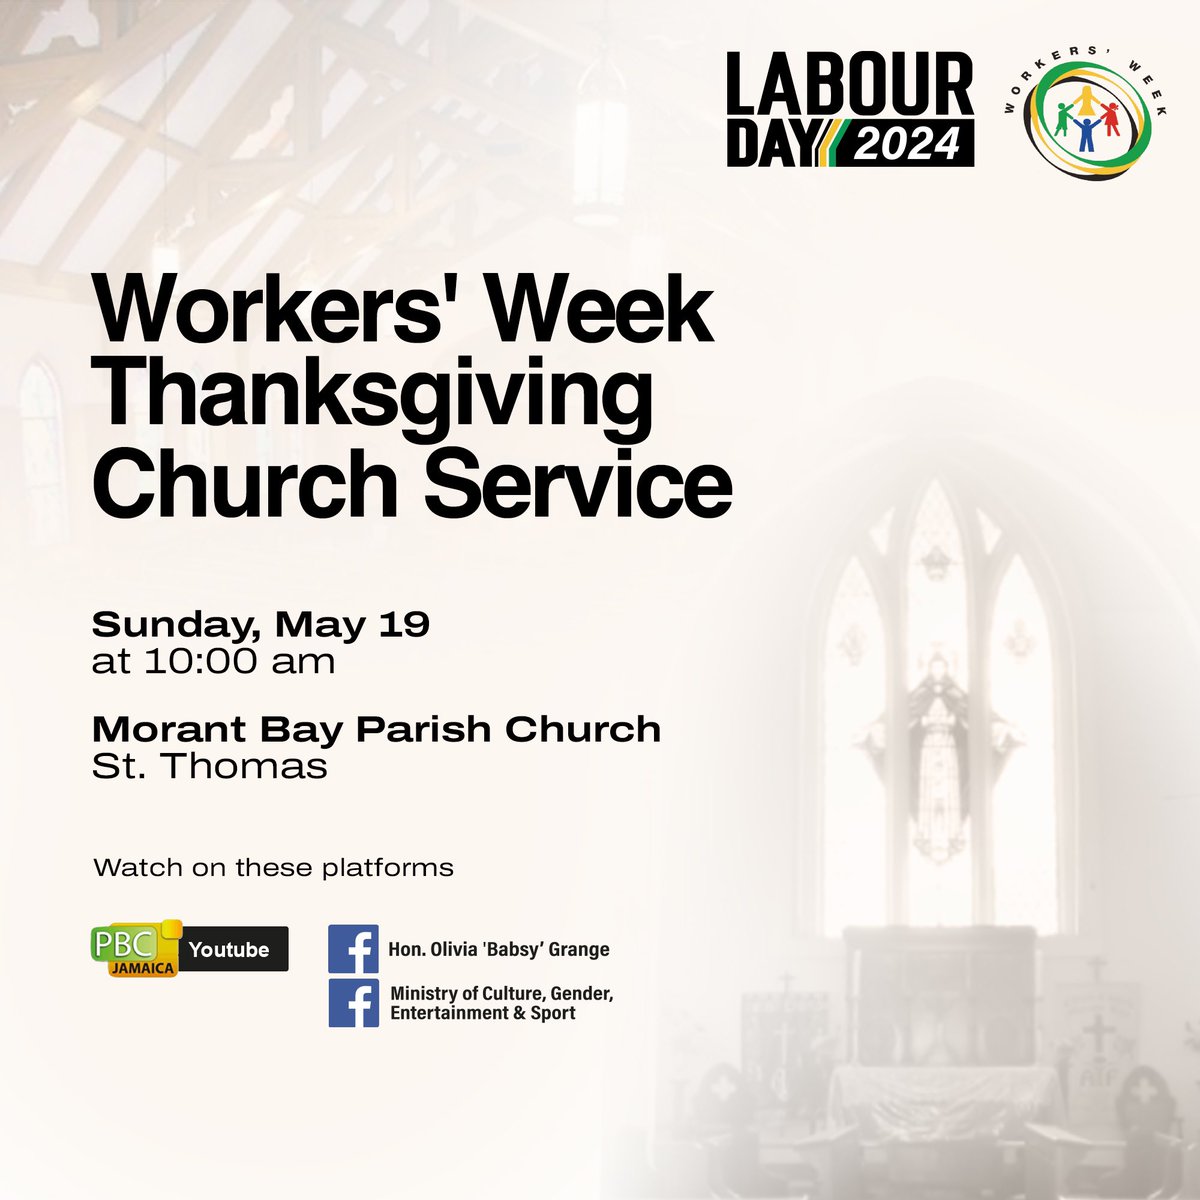 Join us tomorrow for the Workers’ Week Thanksgiving Church Service. 

📍Morant Bay Parish Church, St. Thomas
🗓️ Sunday 19 May 2024
🕛10:00 am

#LabourDay2024 #WorkersWeek 
#WeCare #YourGovernmentCares